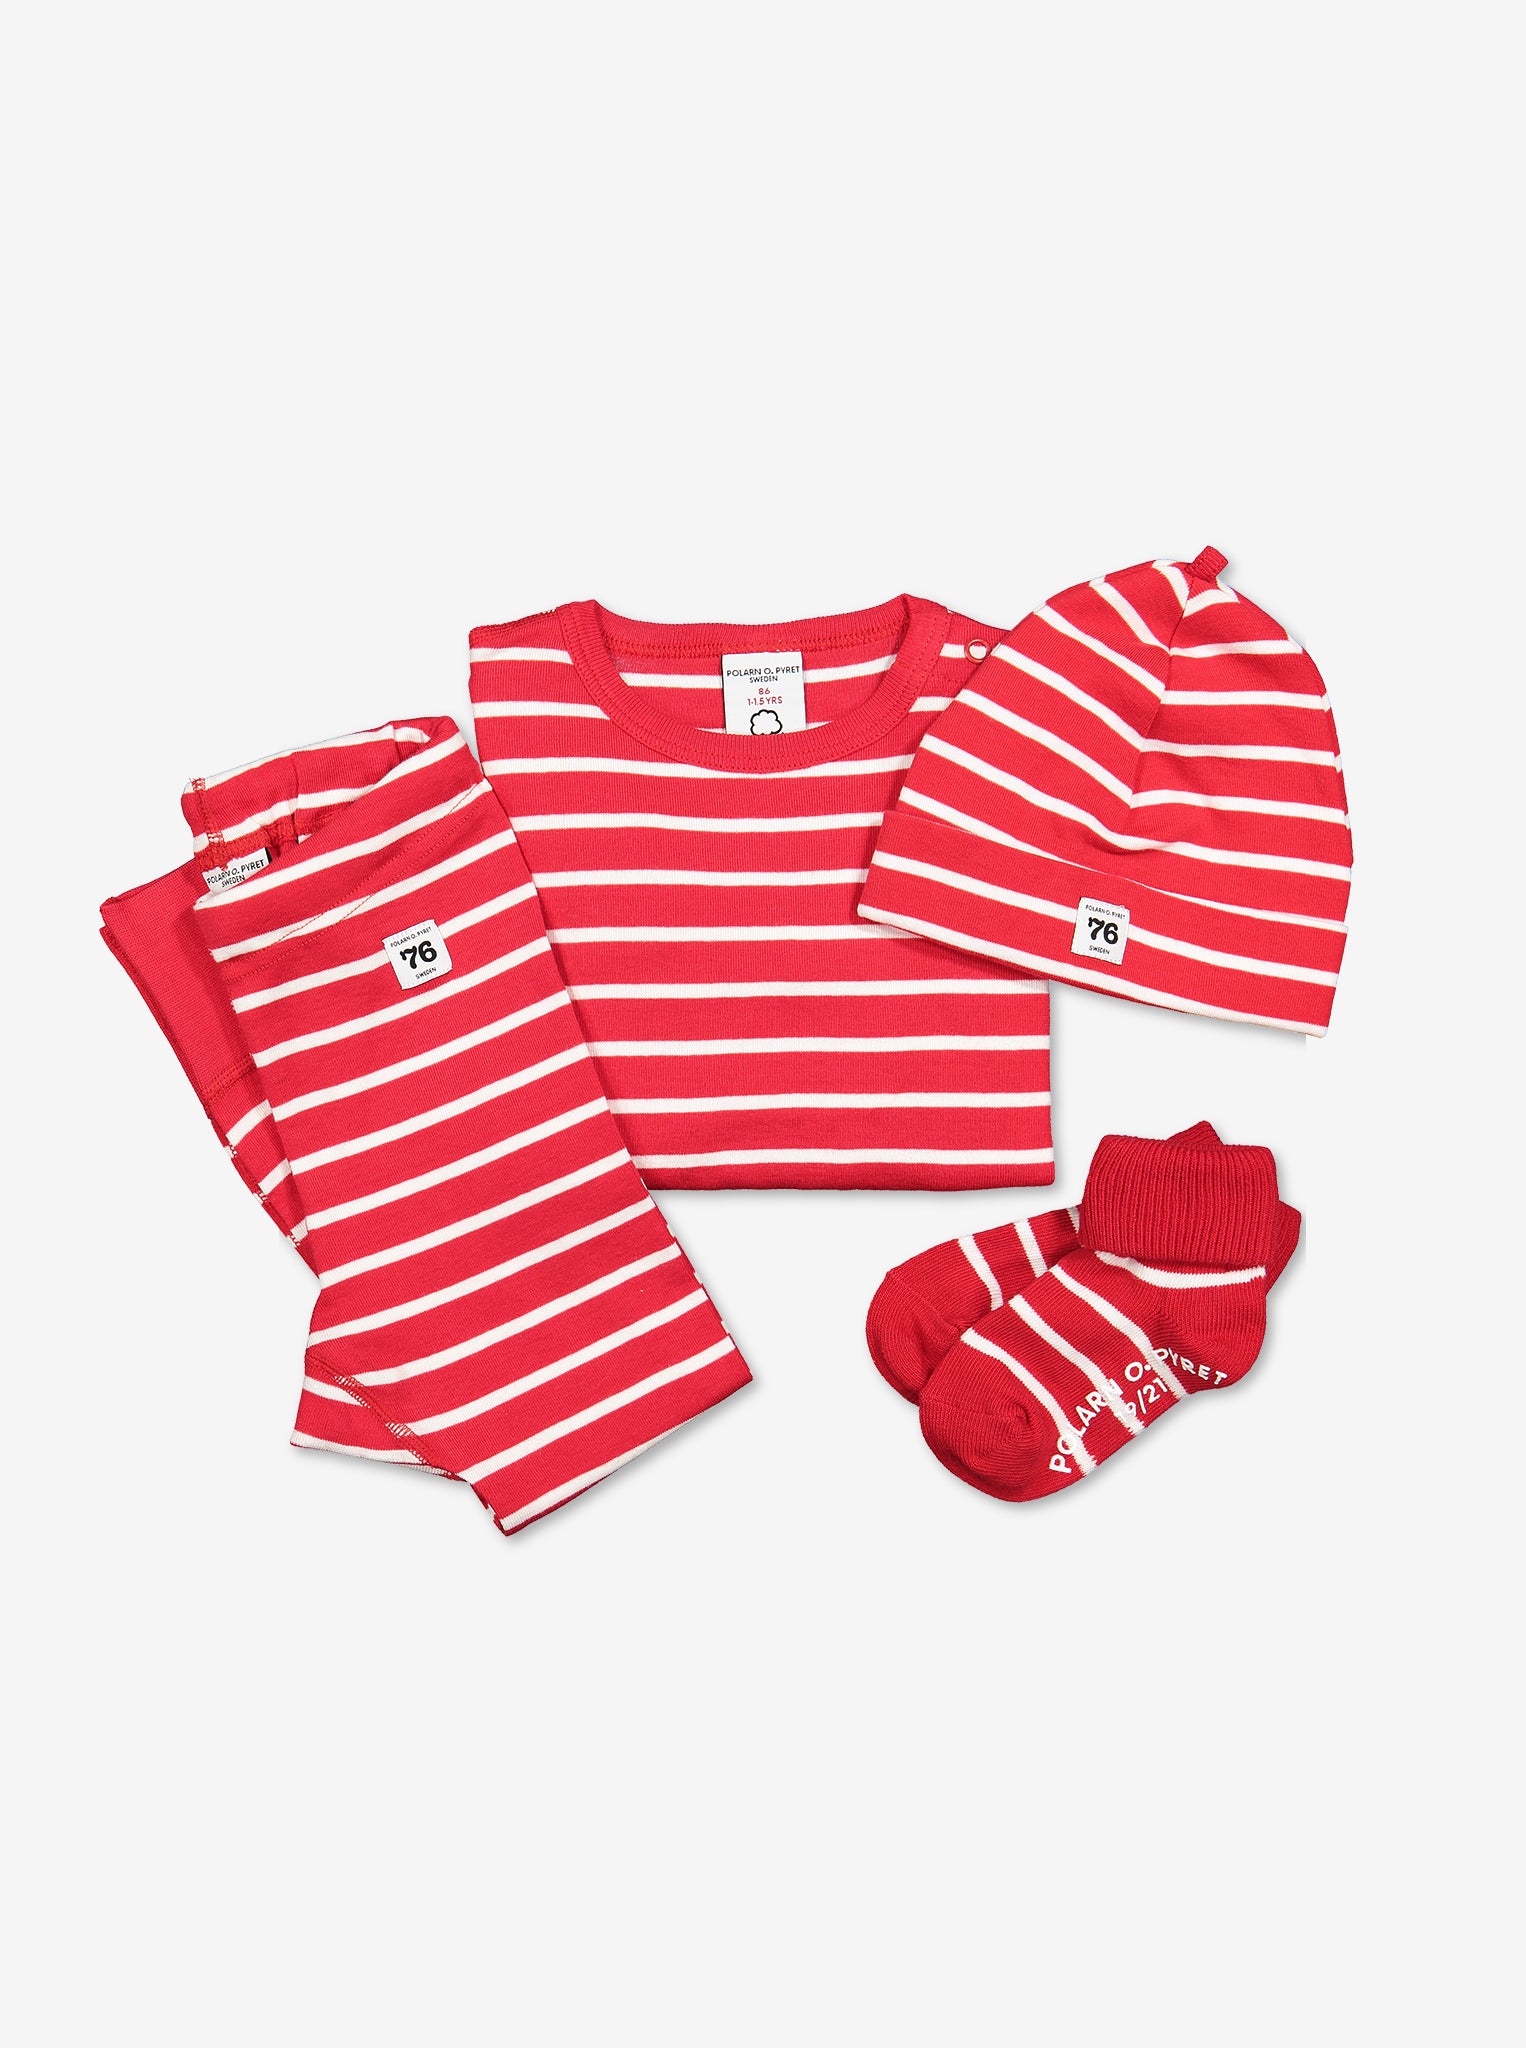 baby top, hat, socks, bottoms in red and white stripes, ethical quality organic cotton polarn o. pyret p